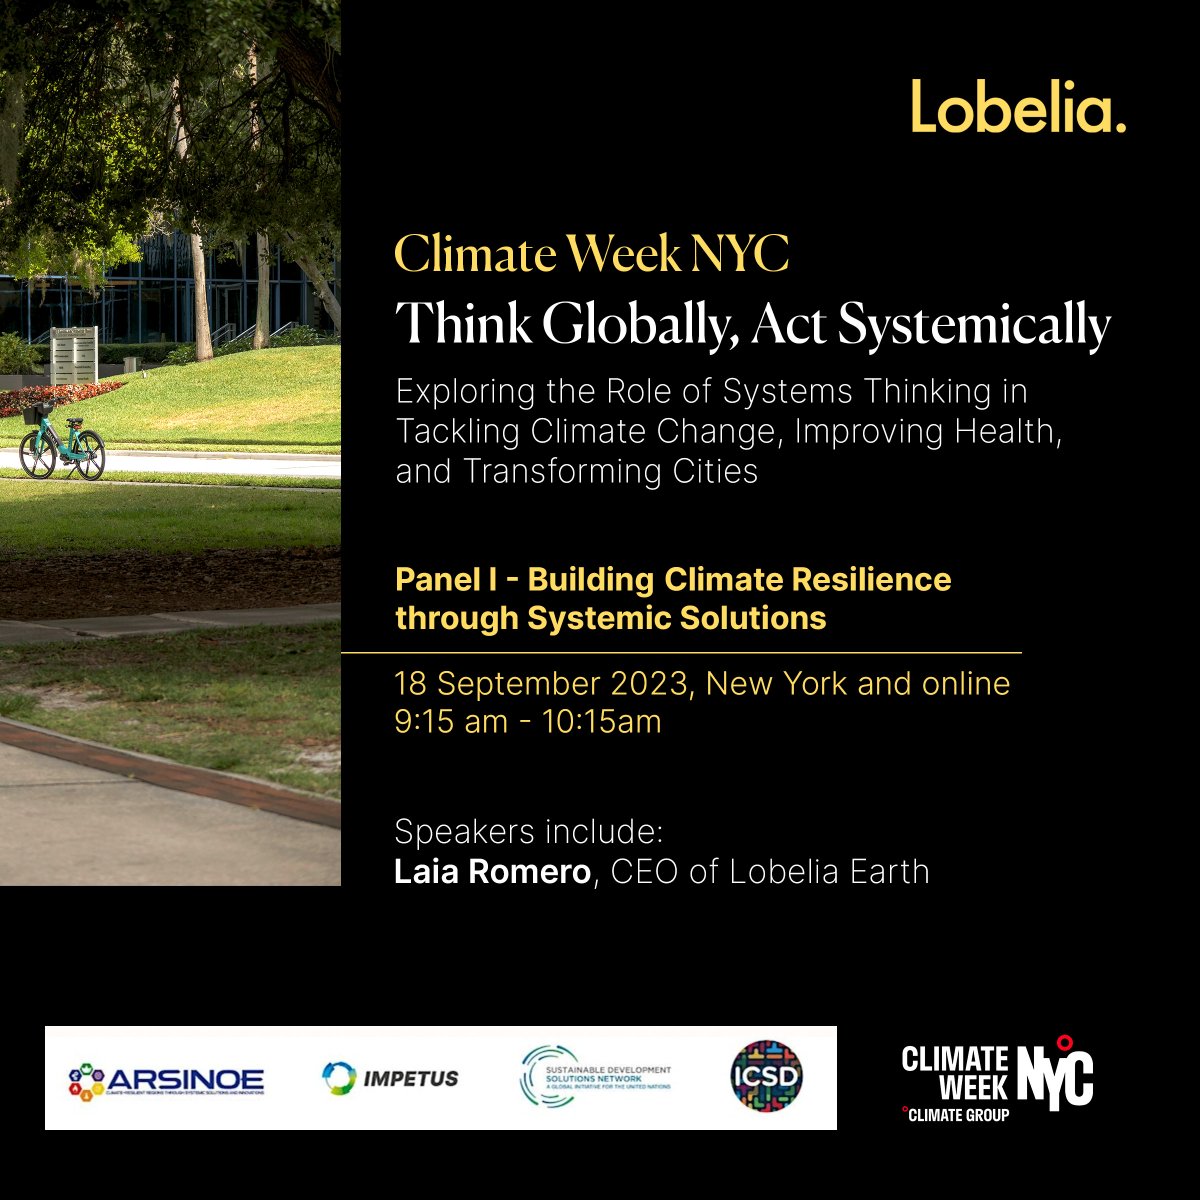 📅18/09 : Laia Romero will be discussing how to build more resilient systems at the @ICSD_Conf in #NY Hosted by @SDSN_EU, @ARSINOE_EU and @ClimateImpetus #ClimateWeekNYC #ICSD2023 #SDGs Register here 👉bit.ly/3EyBkZ8